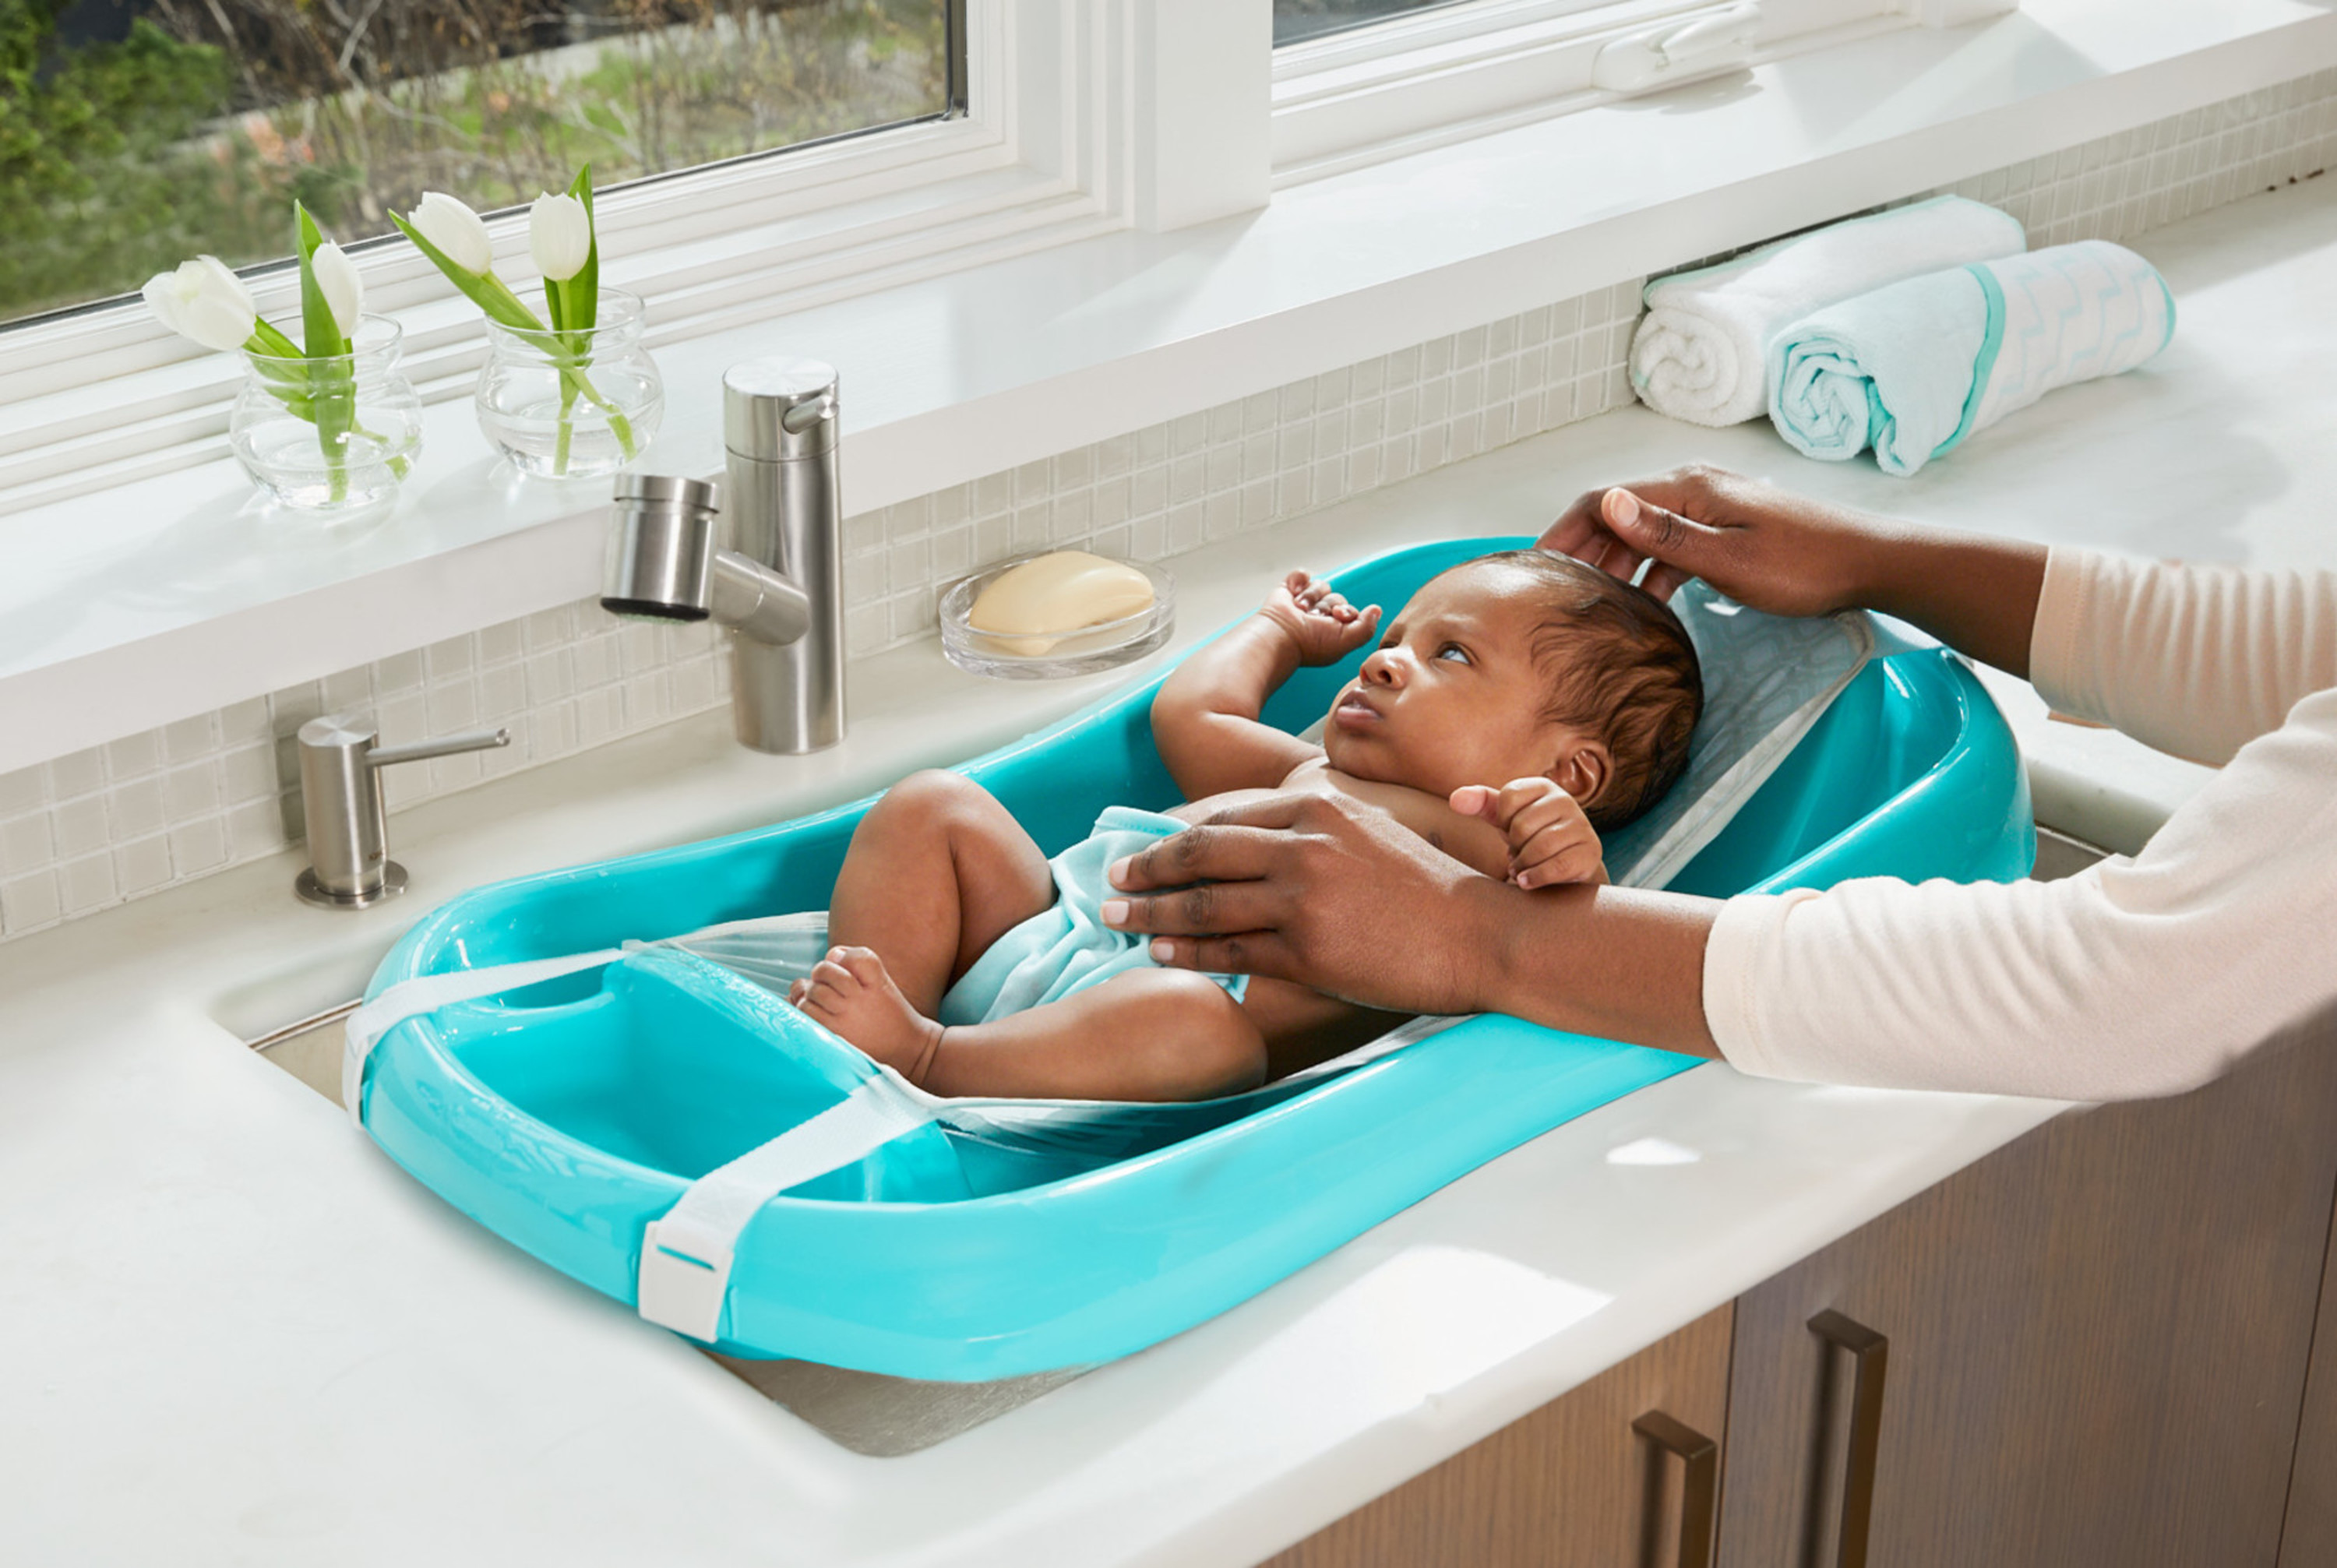 The First Years Sure Comfort Newborn to Toddler Baby Bath Tub, Infant Bath Tub, Teal - image 3 of 6